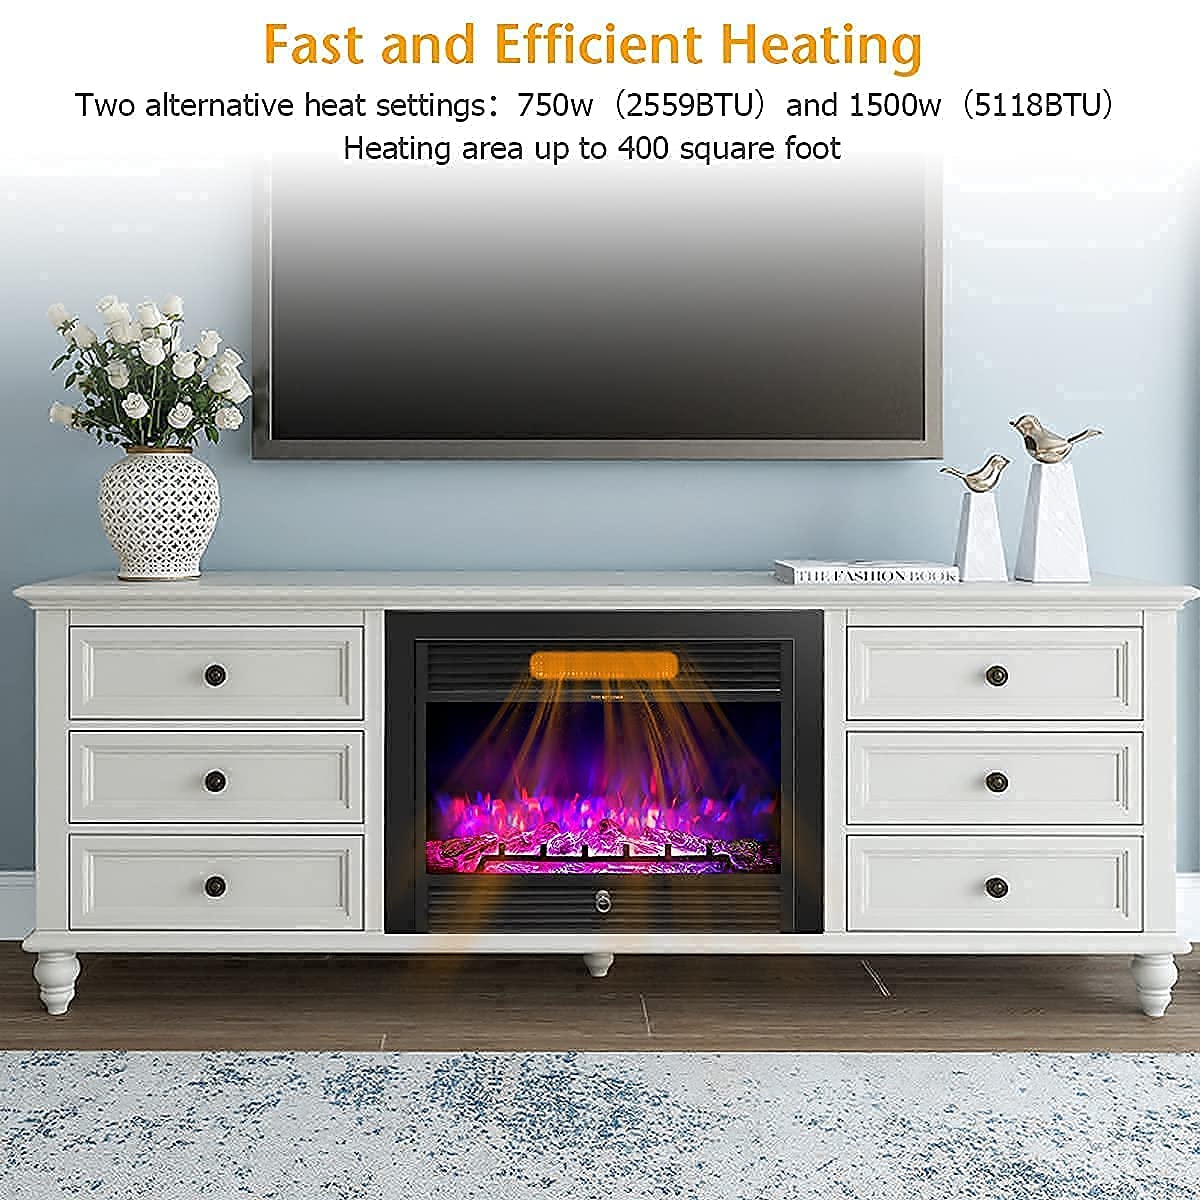 Giantex 28.5" Electric Fireplace Insert Recessed Mounted with 3 Color Adjustable Flames